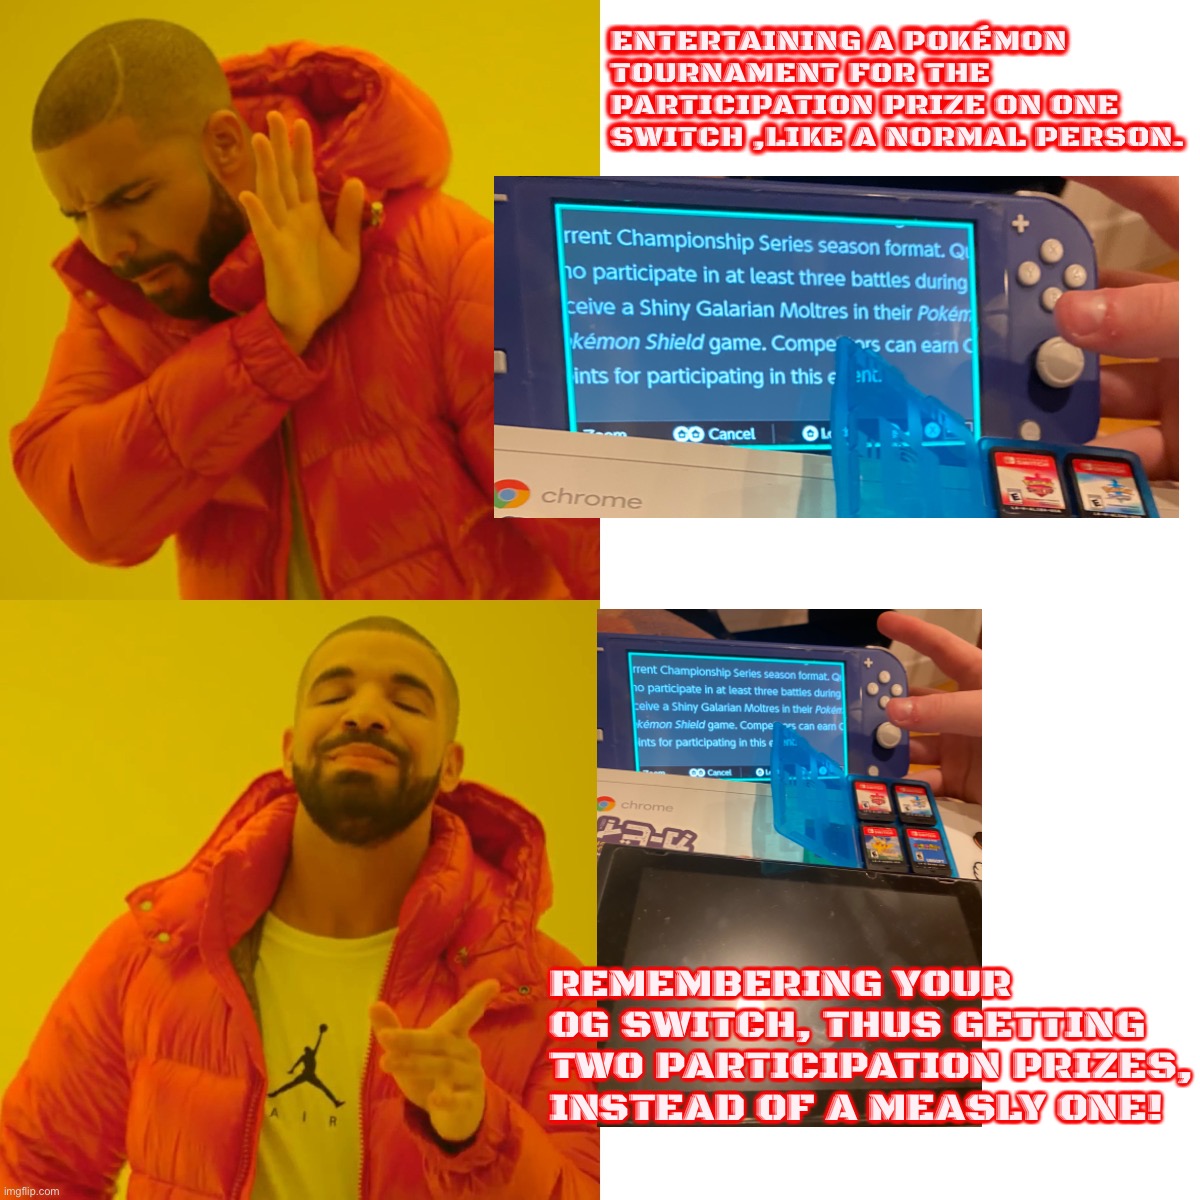 A amazing easy to get participation prize ,Nahhh. 2 amazing easy to get participation prizes , nice. | ENTERTAINING A POKÉMON TOURNAMENT FOR THE PARTICIPATION PRIZE ON ONE SWITCH ,LIKE A NORMAL PERSON. REMEMBERING YOUR OG SWITCH, THUS GETTING TWO PARTICIPATION PRIZES, INSTEAD OF A MEASLY ONE! | image tagged in memes,drake hotline bling | made w/ Imgflip meme maker